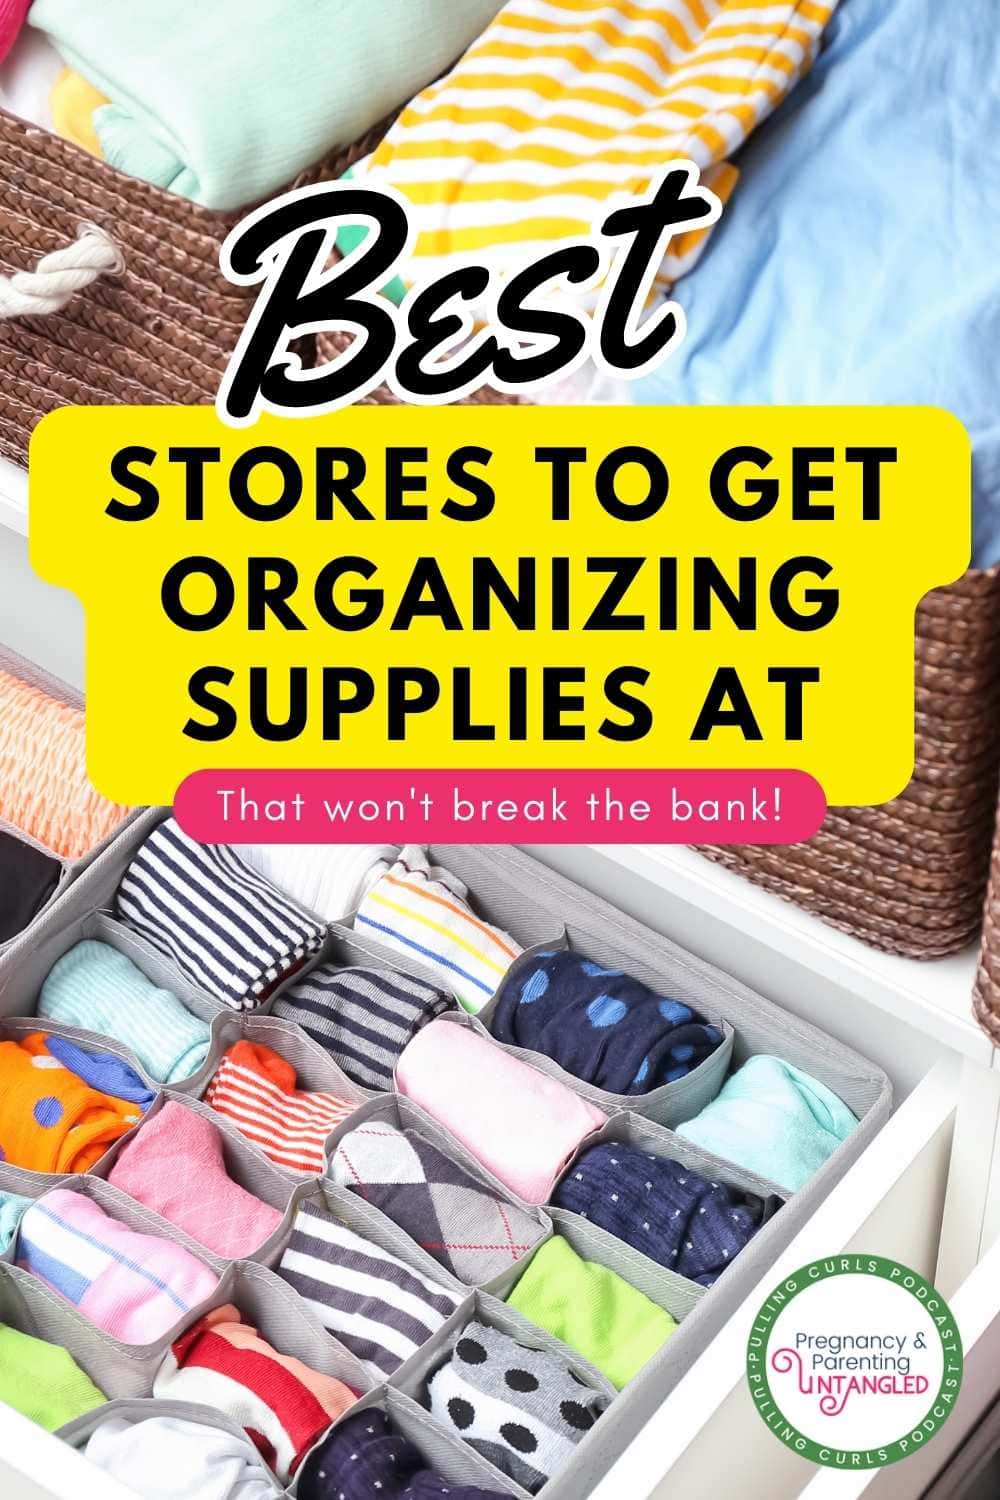 Looking to simplify your space? Check out these top stores for organizing supplies! Ross offers budget-friendly options, while Walmart provides well-priced items. HomeGoods has a variety of pretty and affordable organization essentials. Need sturdy bins? IKEA's got you covered. For convenience, shop on Amazon. The Container Store is pricey but has high-quality products. #organization #homegoods #IKEA #Walmart #Amazon via @pullingcurls